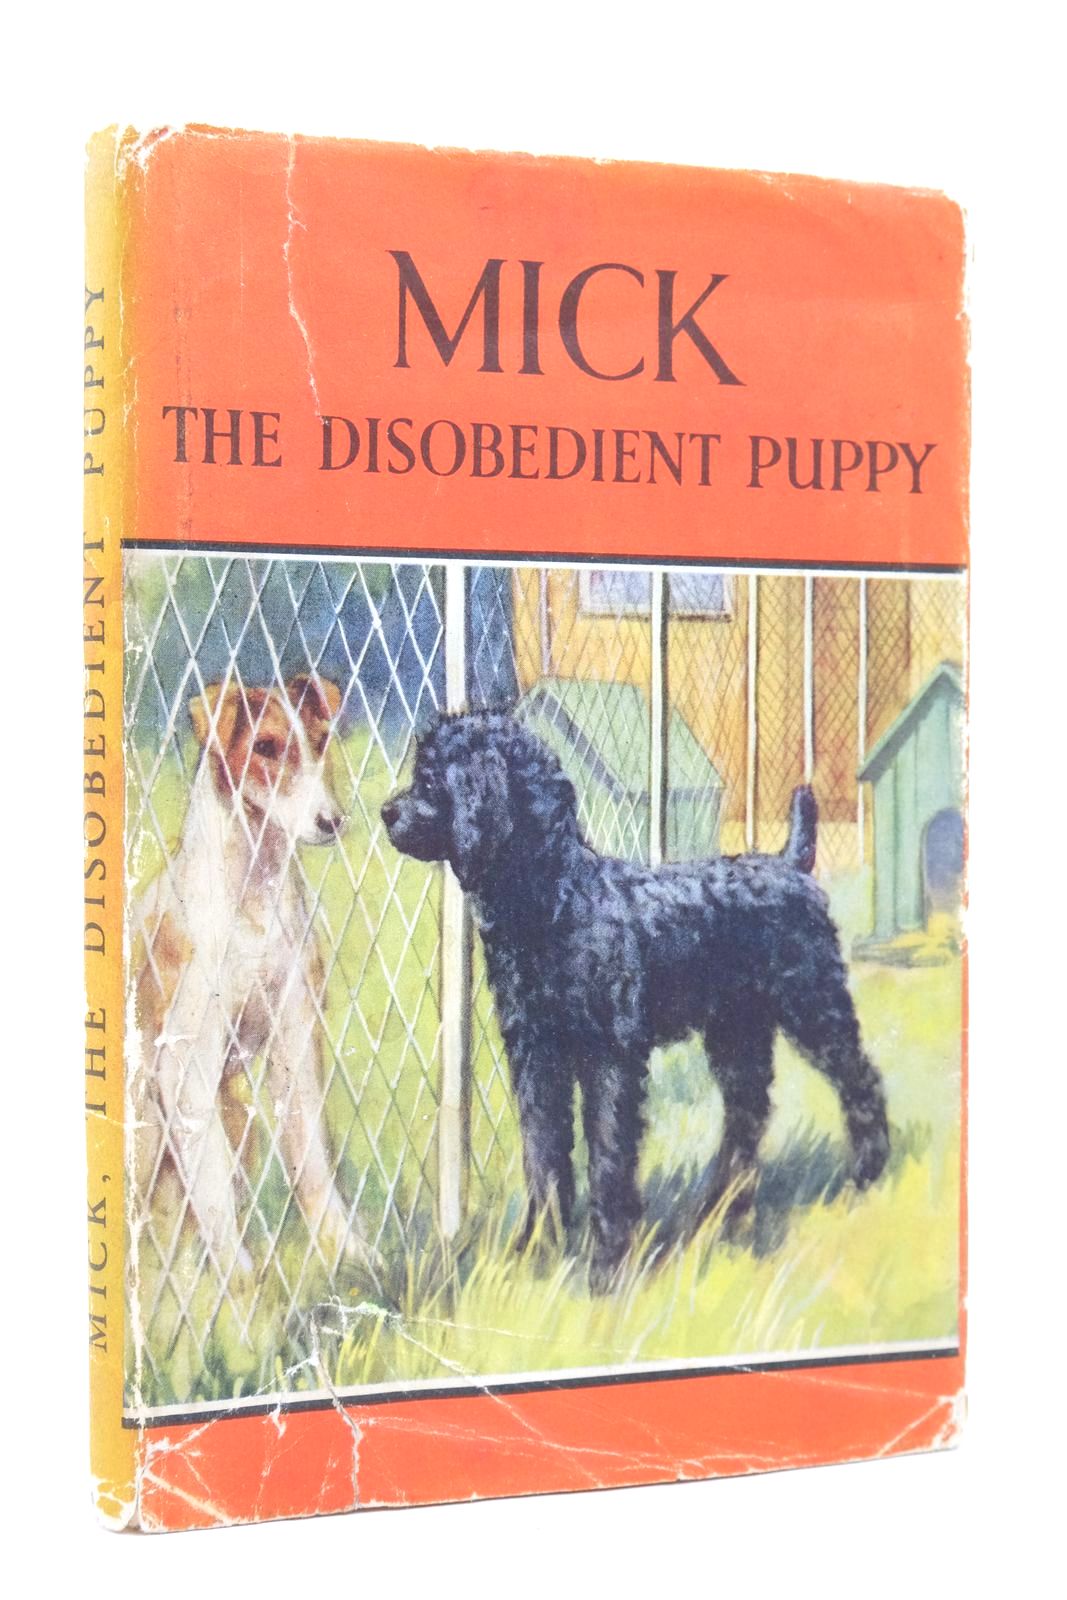 Photo of MICK THE DISOBEDIENT PUPPY written by Barr, Noel illustrated by Hickling, P.B. published by Wills & Hepworth Ltd. (STOCK CODE: 2139501)  for sale by Stella & Rose's Books